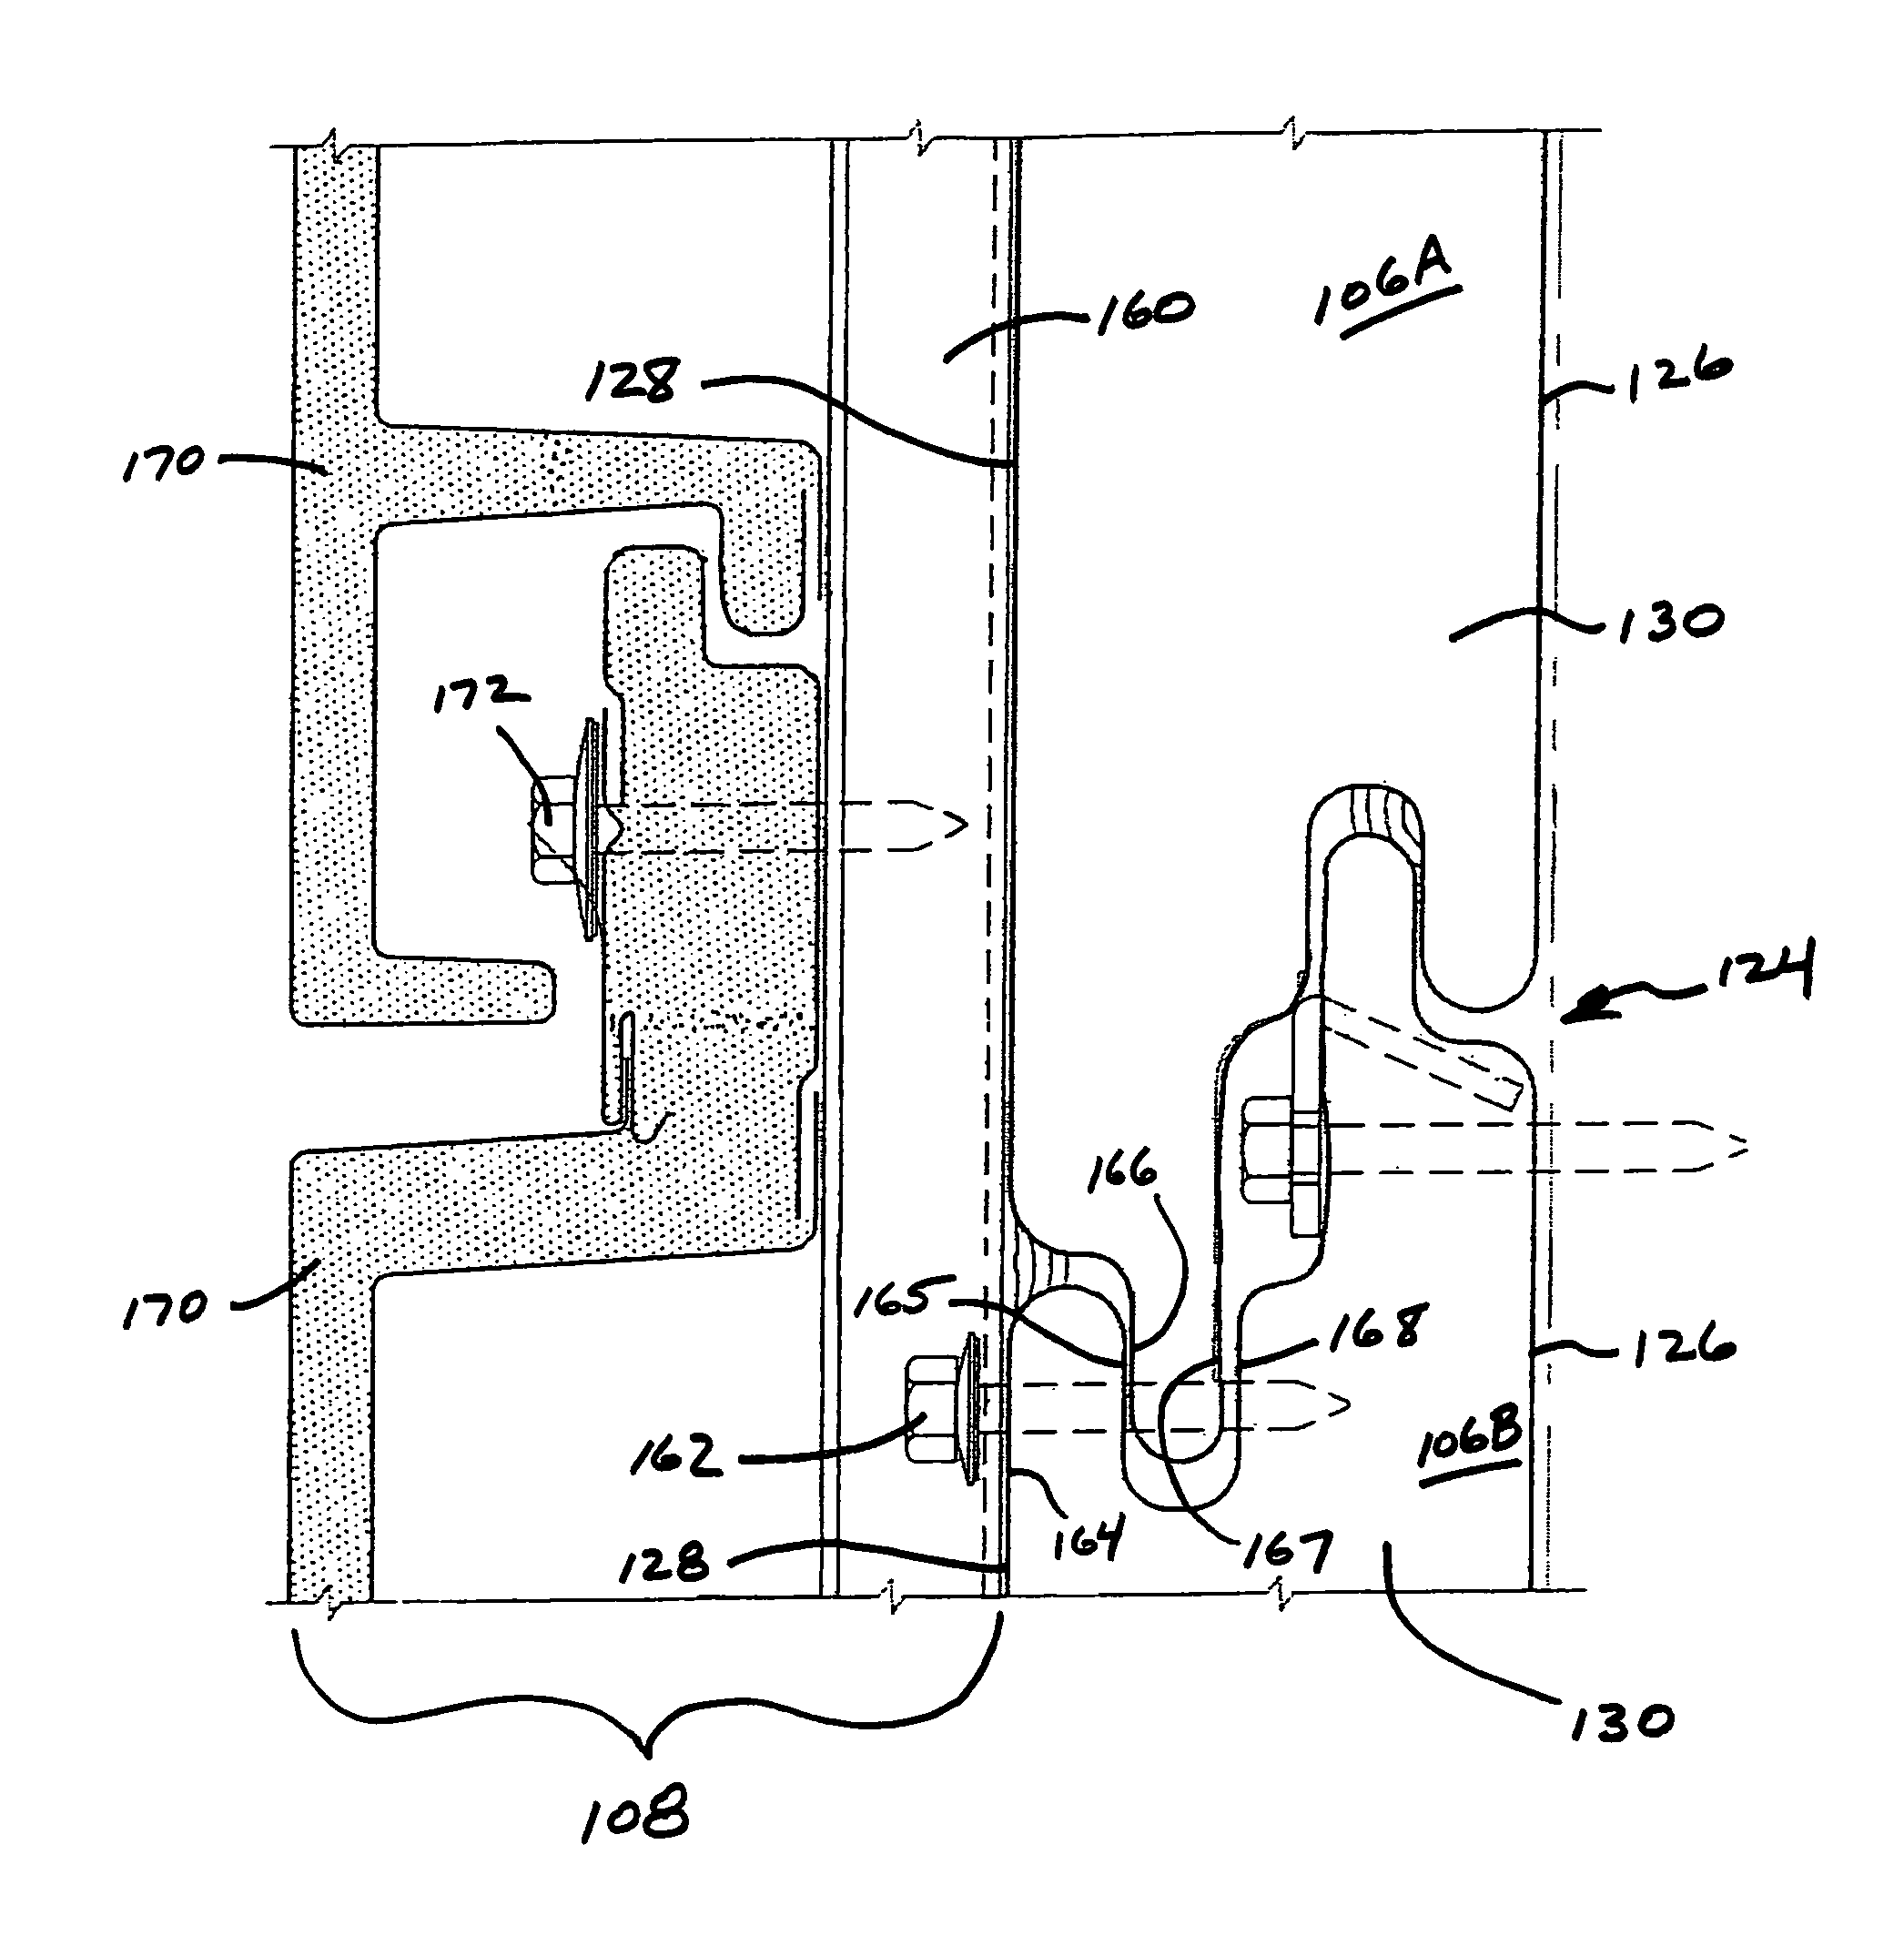 Advanced building envelope delivery system and method